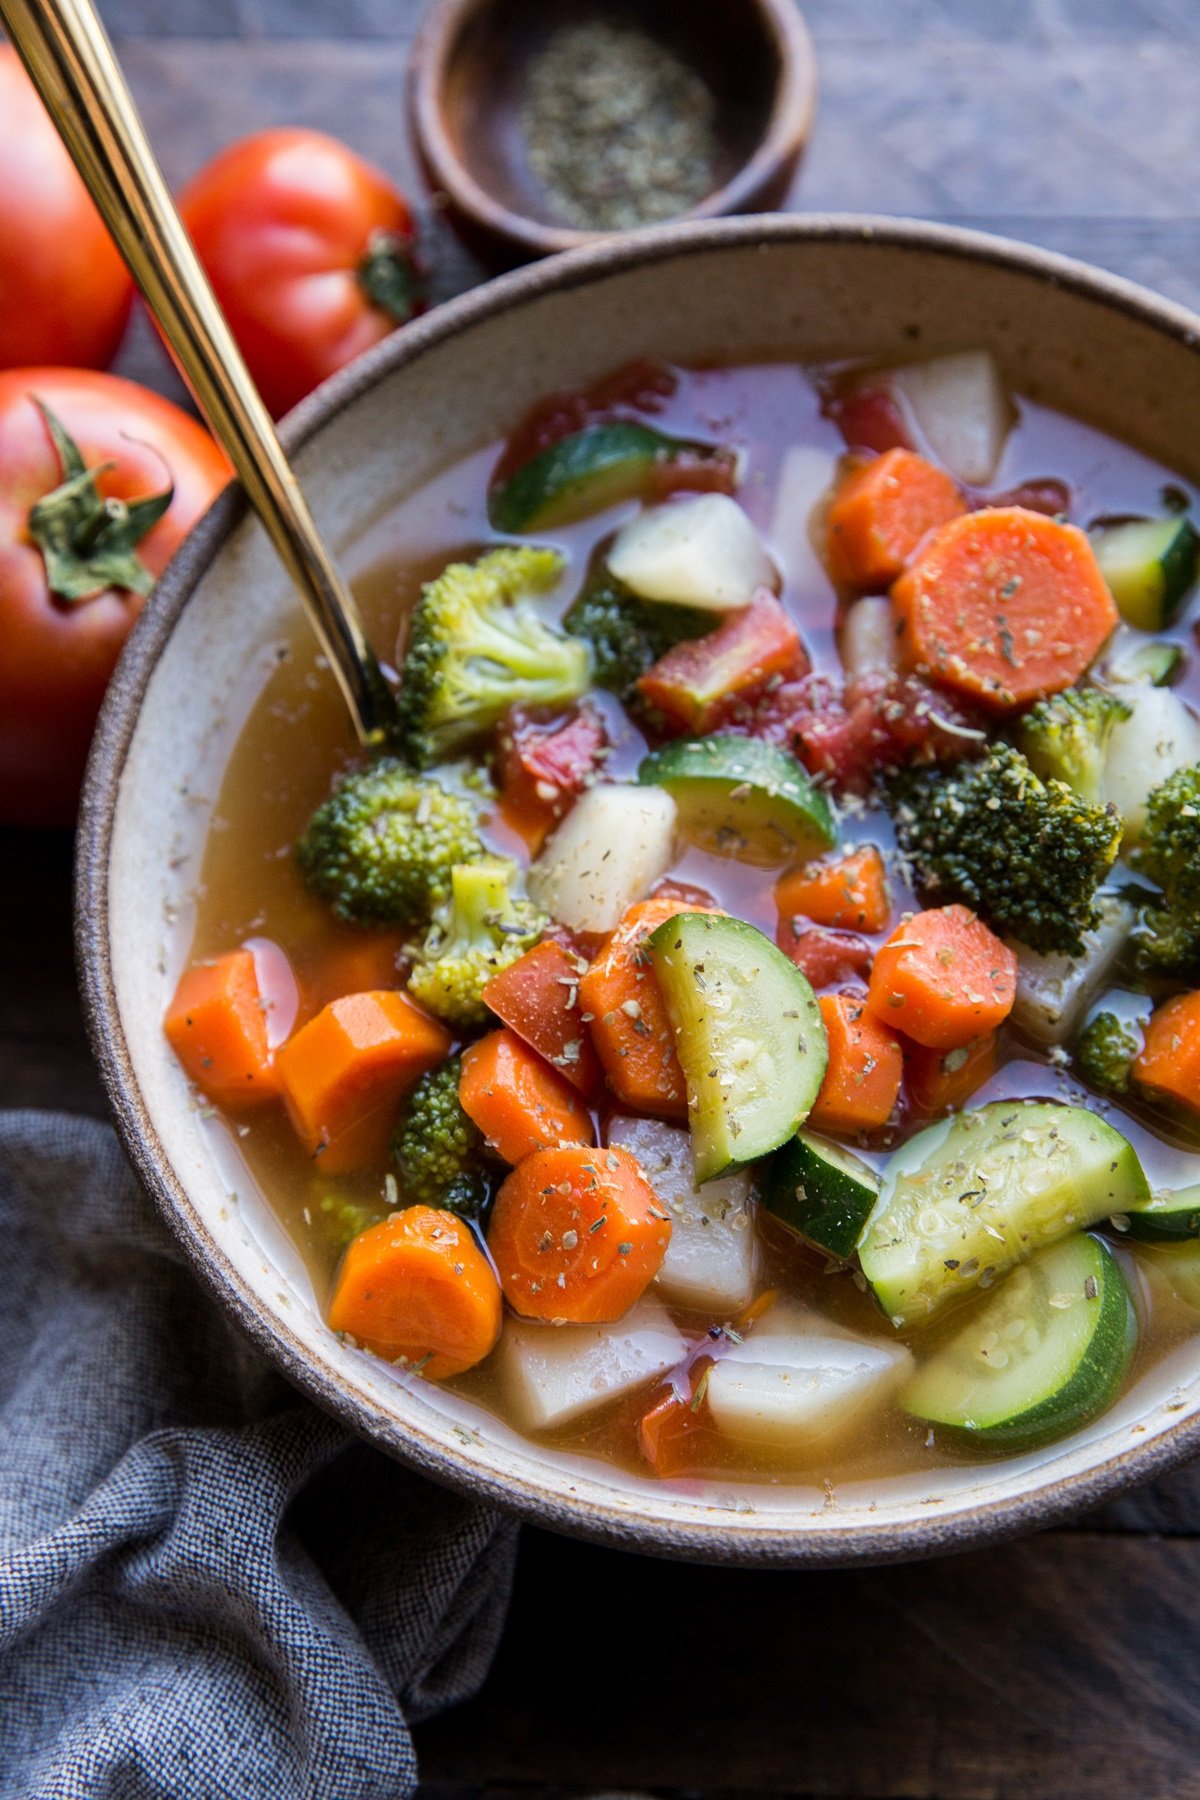 Easy Vegetable Soup - a quick and easy vegan soup recipe - easy to add or change vegetables! Paleo, whole30, low-carb and satisfying!